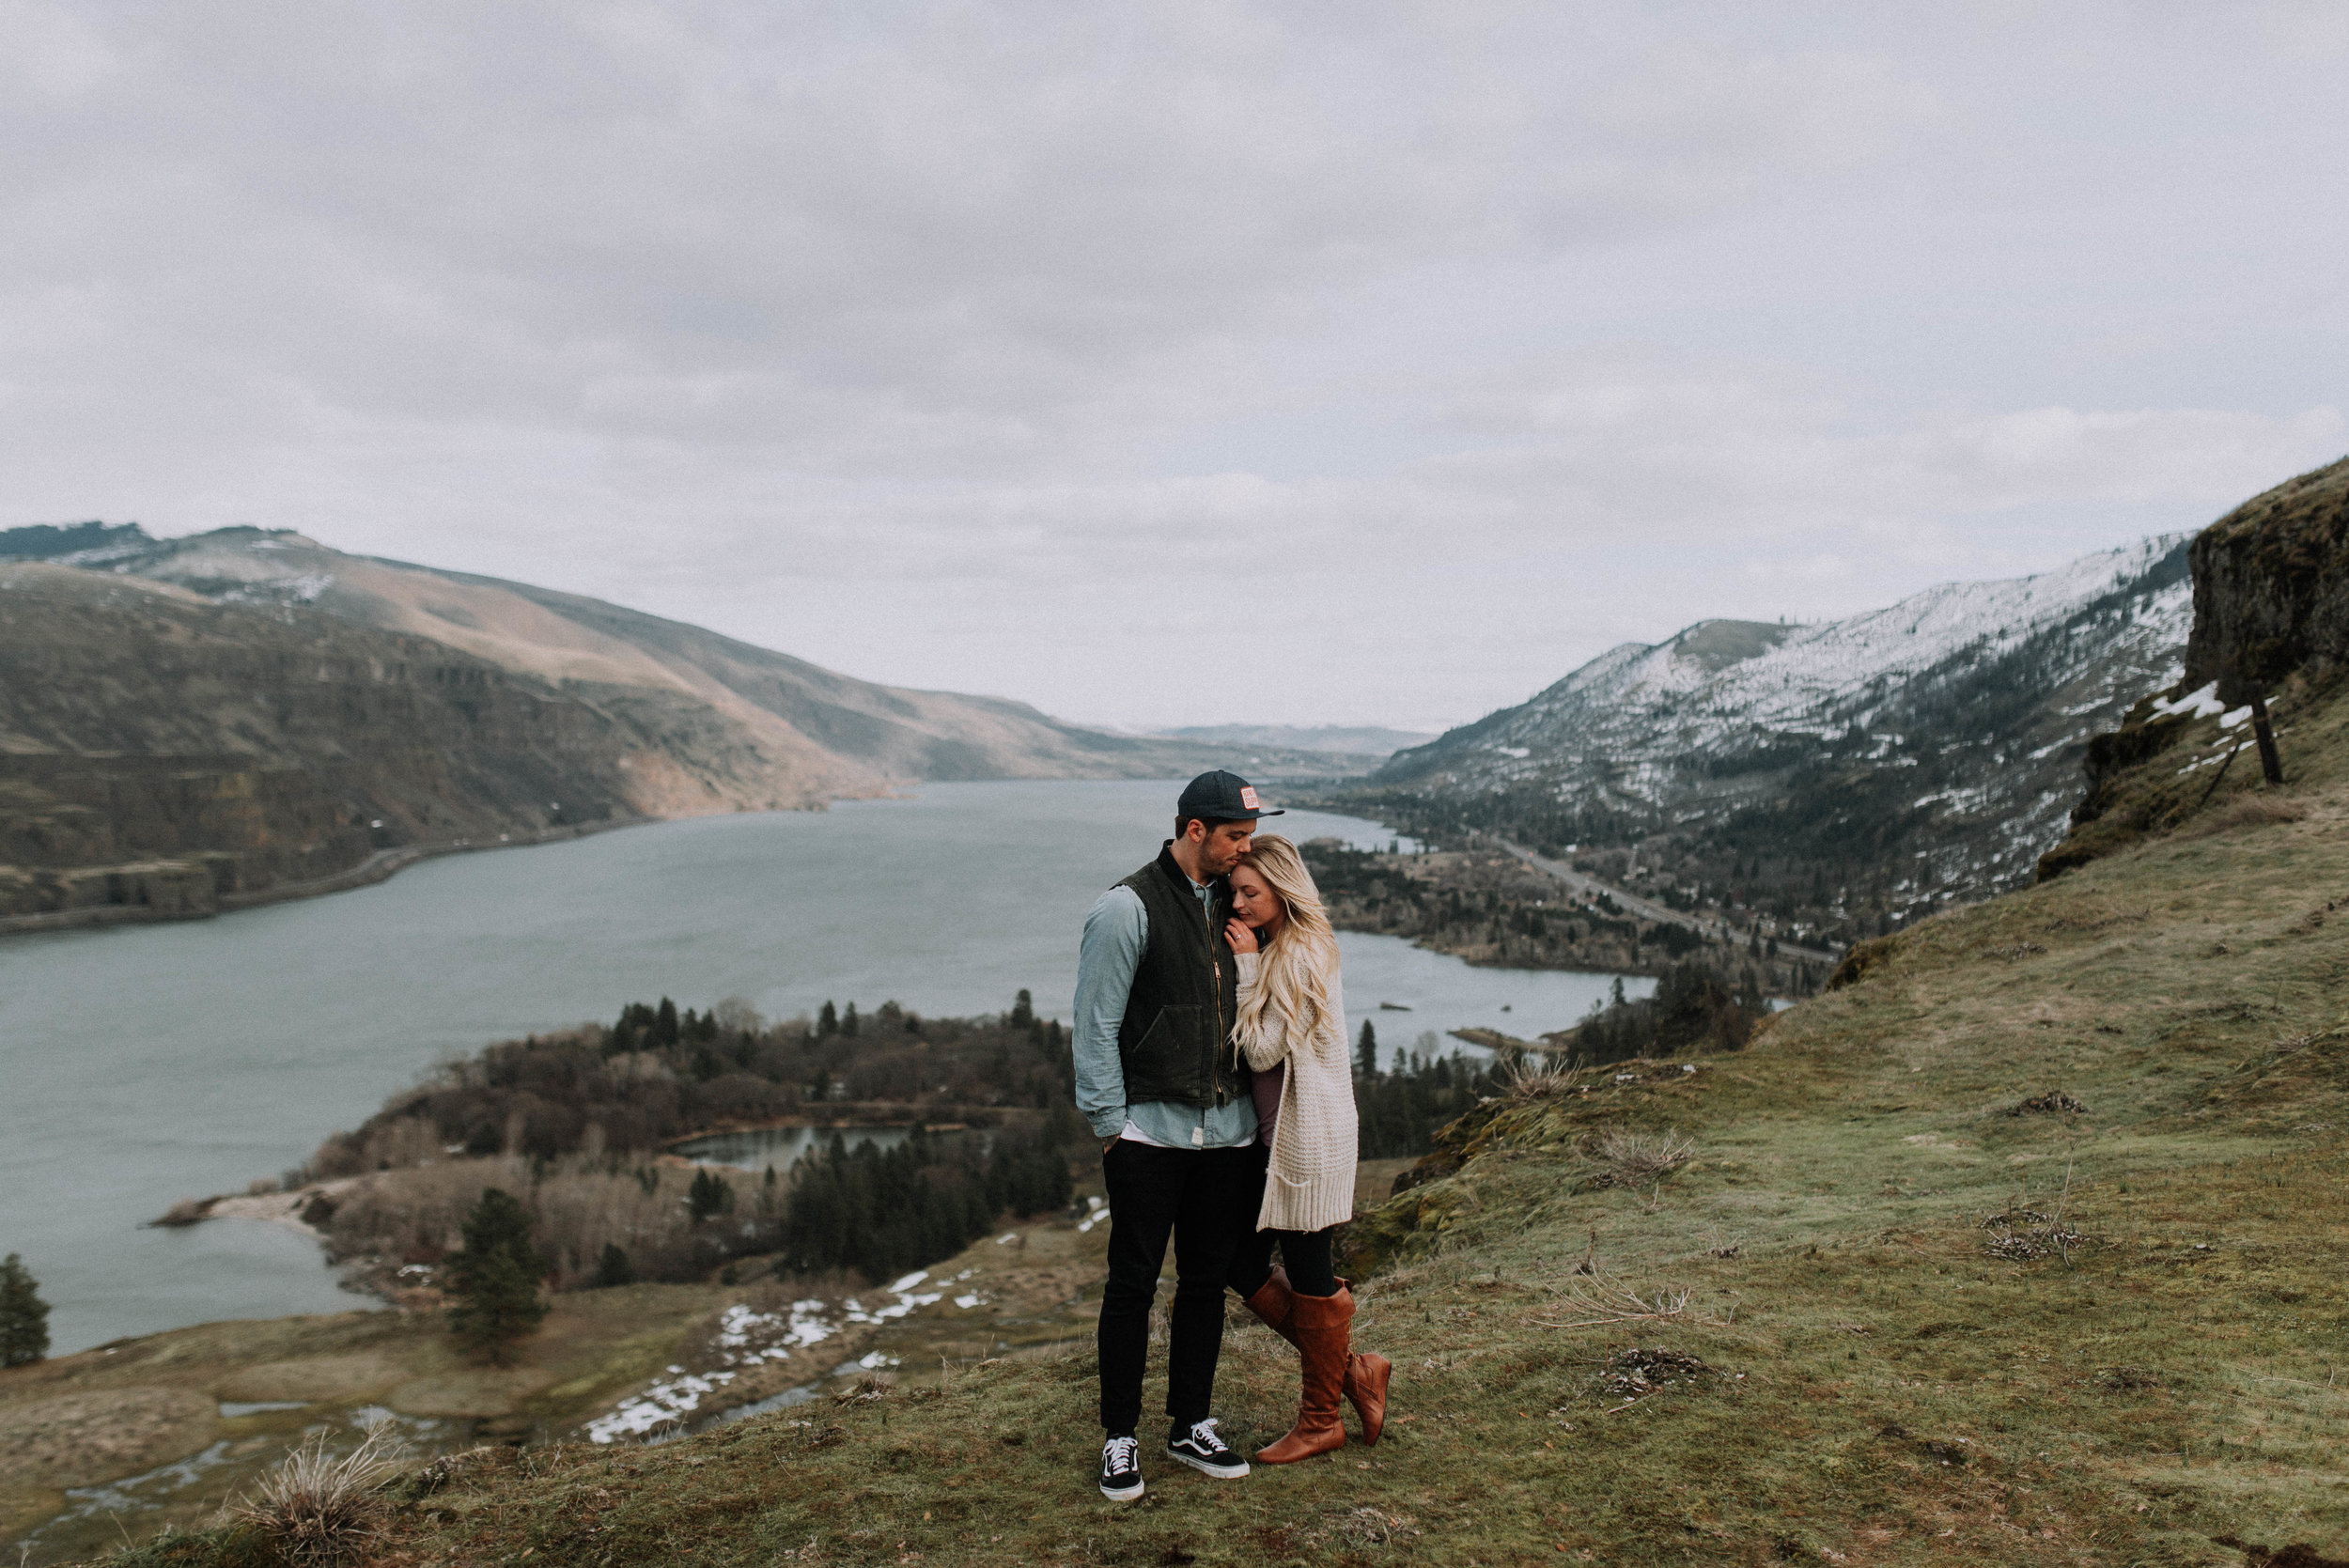 Rowena Crest Engagement Session | Columbia River Gorge Engagement Session | Engagement Ideas | Oregon Engagement | Oregon Photographer | PNW Engagement Photos | Jessica Heron Images